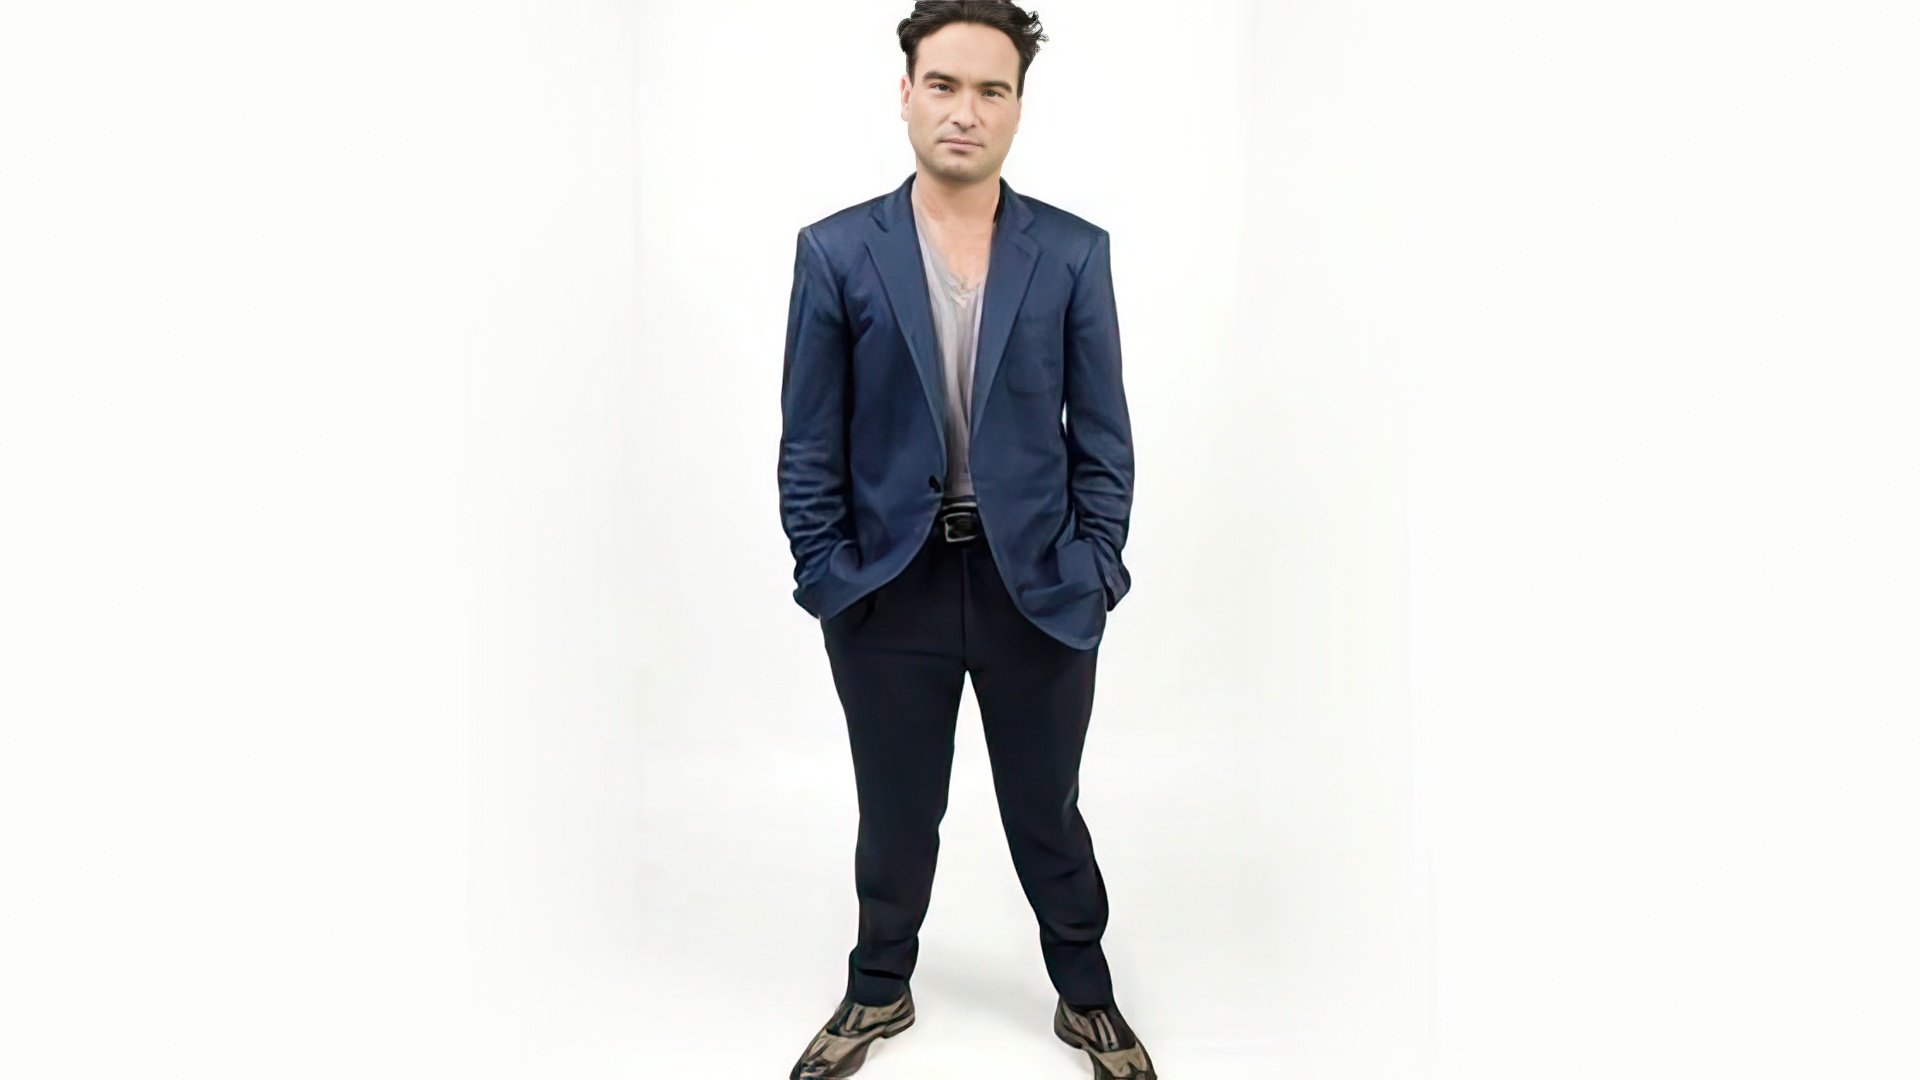 Johnny Galecki's height is 5'5'